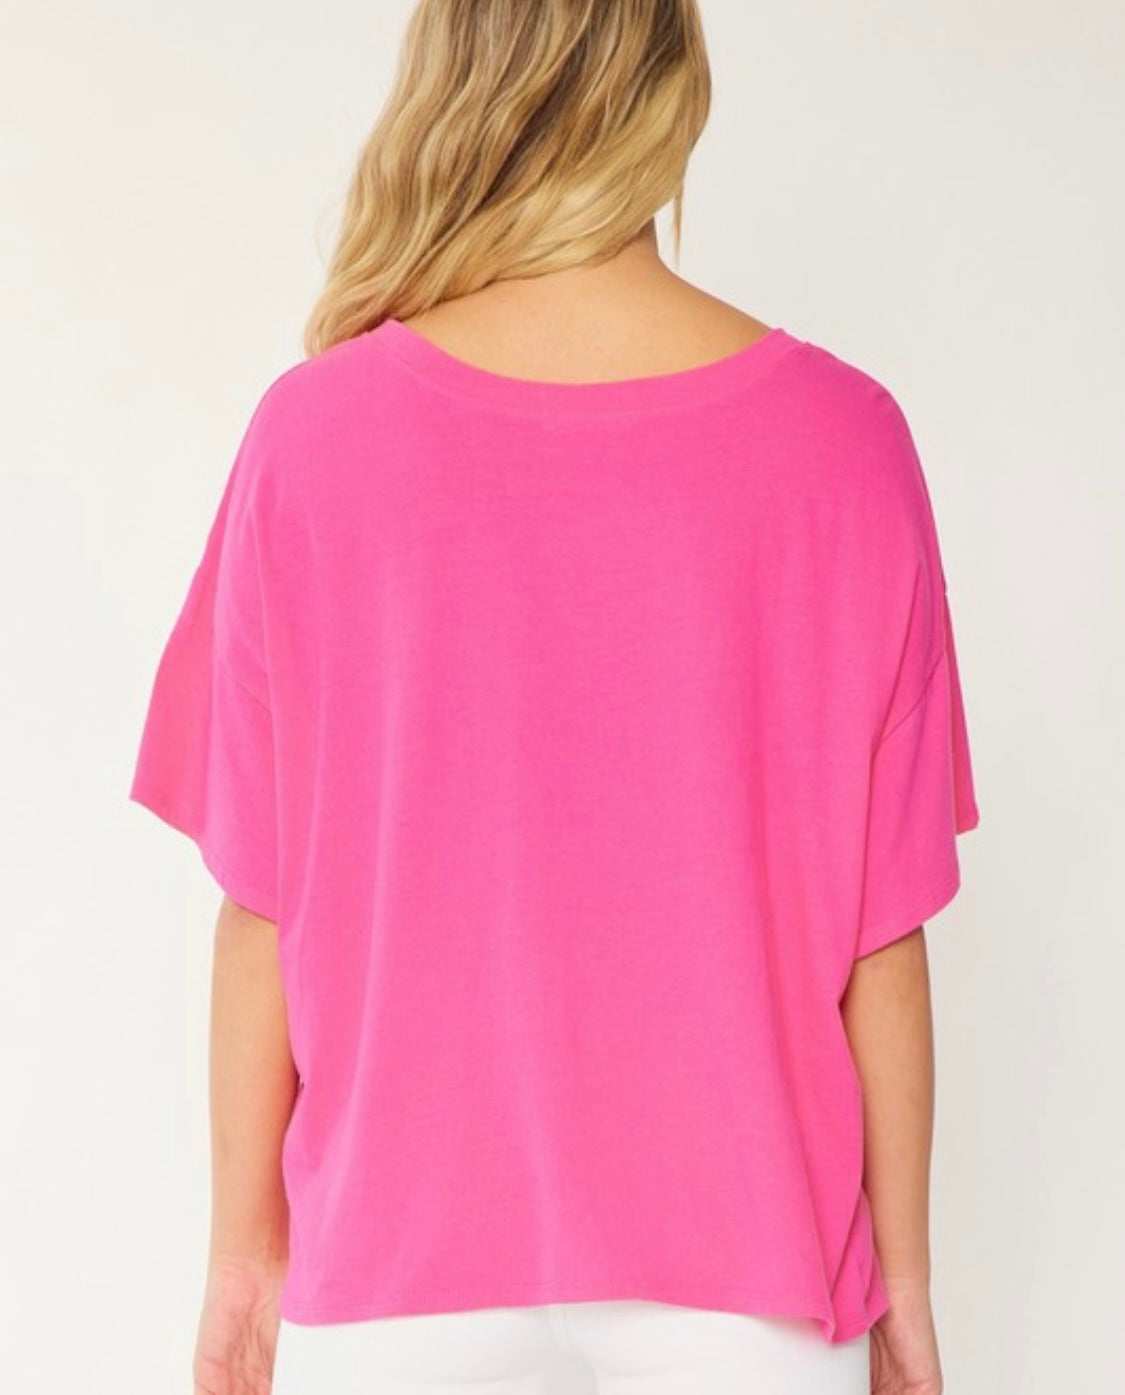 Slouchy Tee in Hot Pink